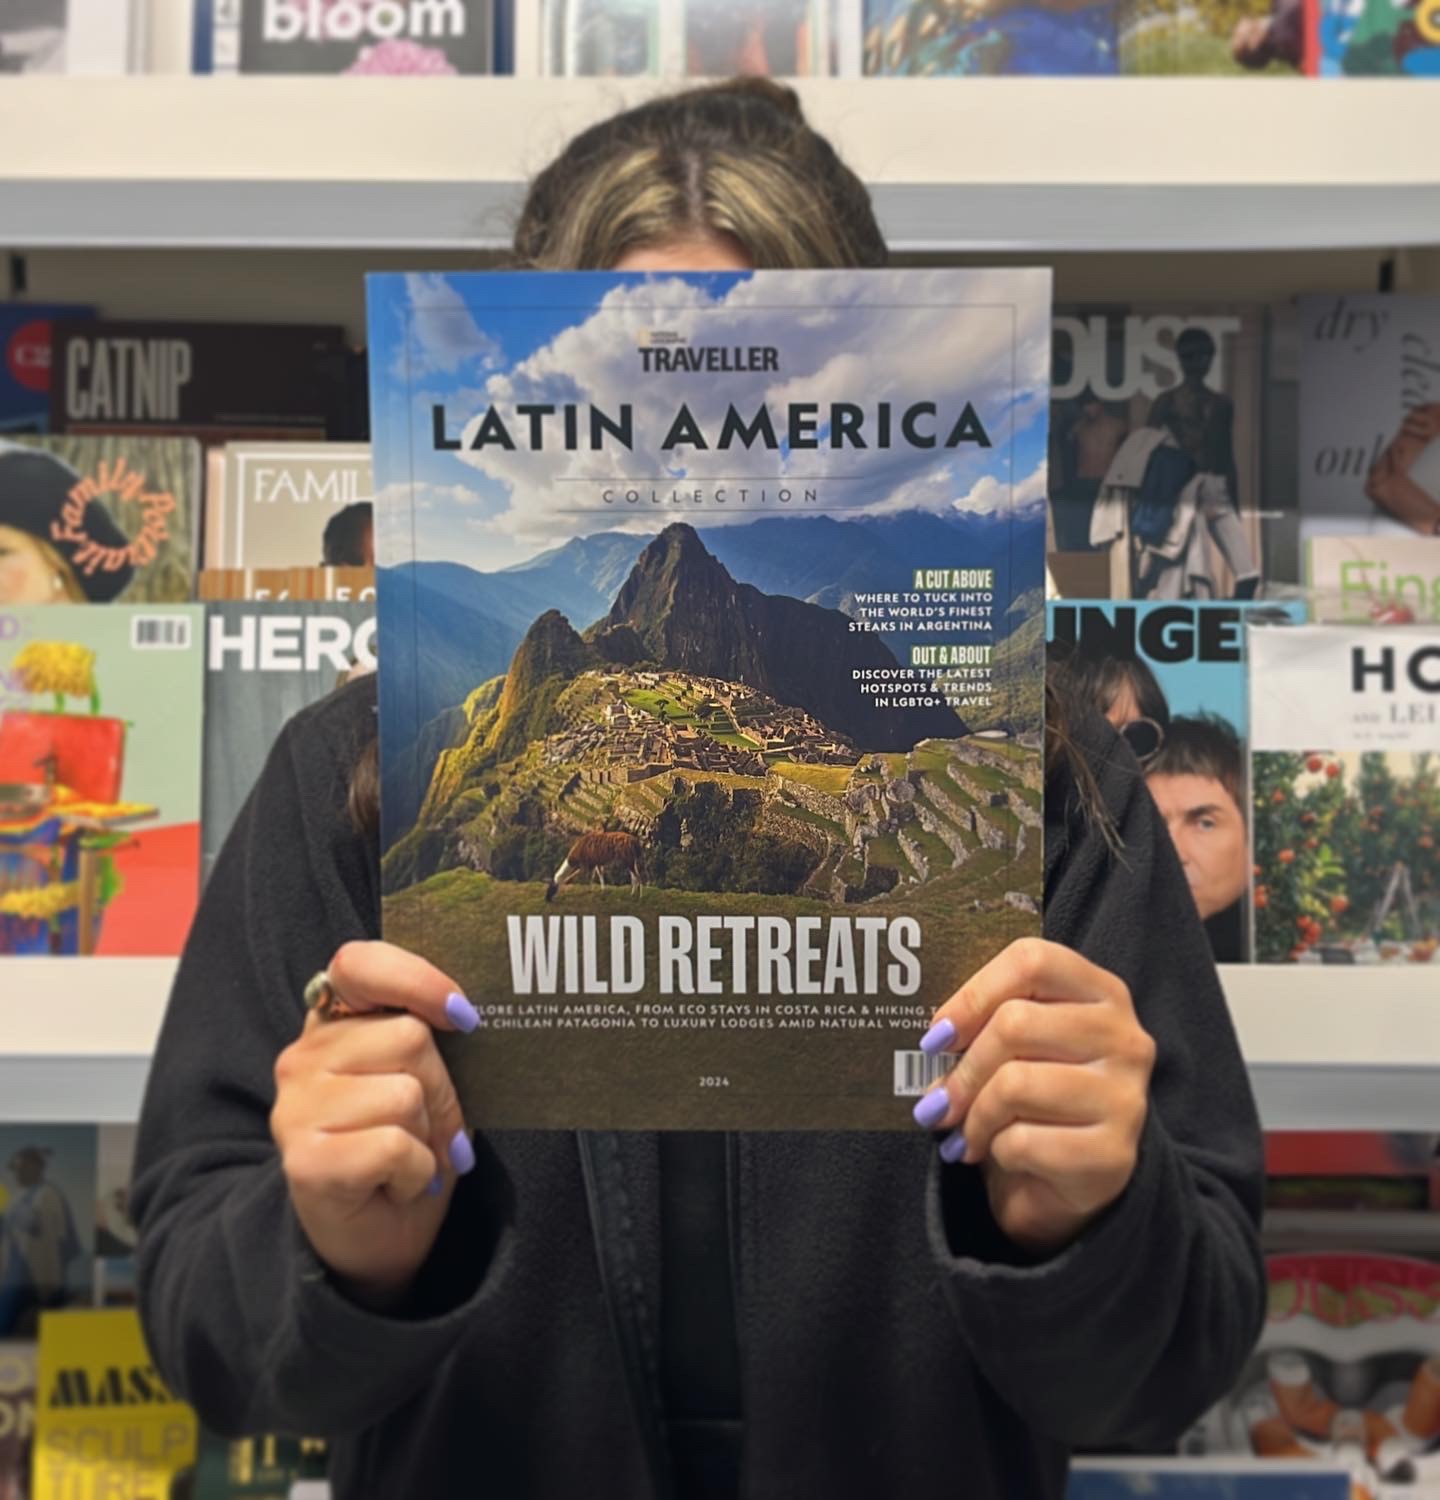 Discovering Latin America's Wild Retreats: A National Geographic Traveller Collection Highlight